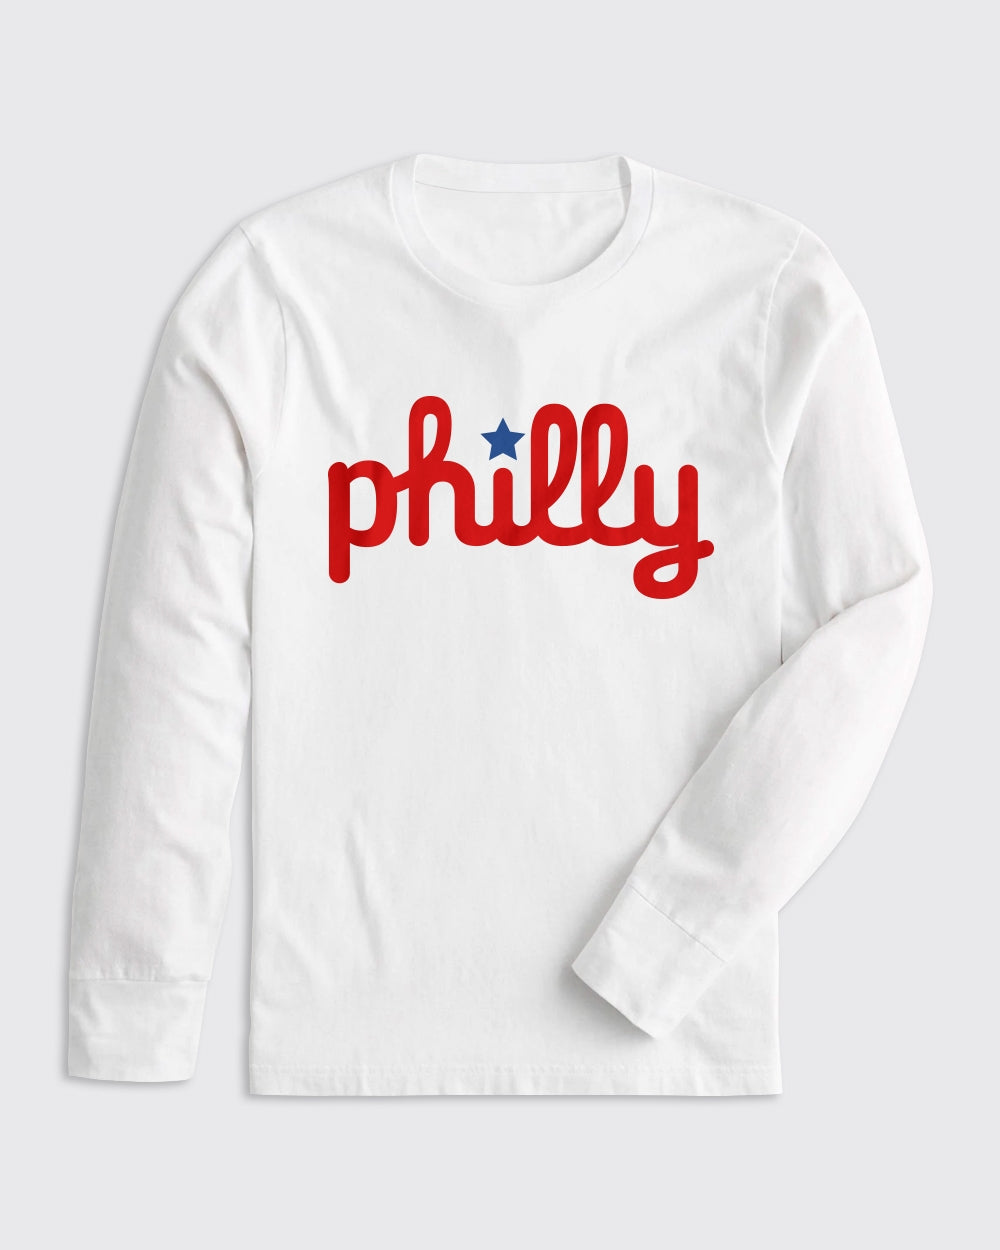 phillies clothing apparel